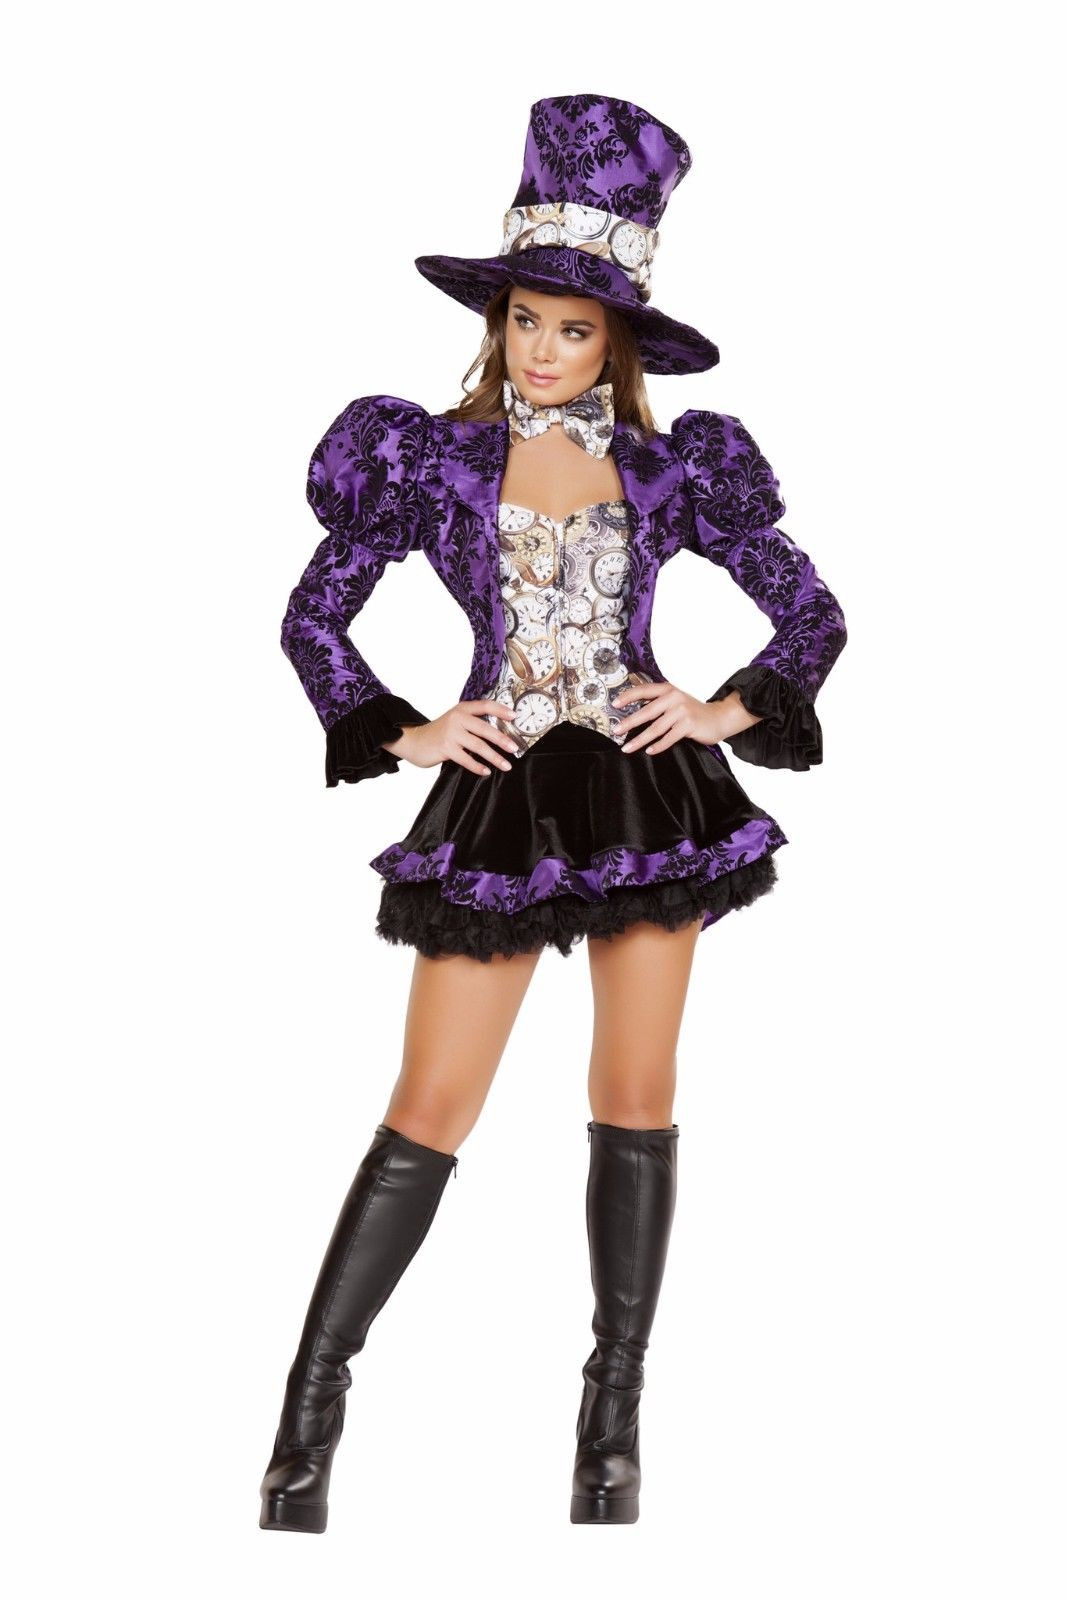 Mad Hatters Tea Party Costume Ideas
 Alice Through The Looking Glass Costumes